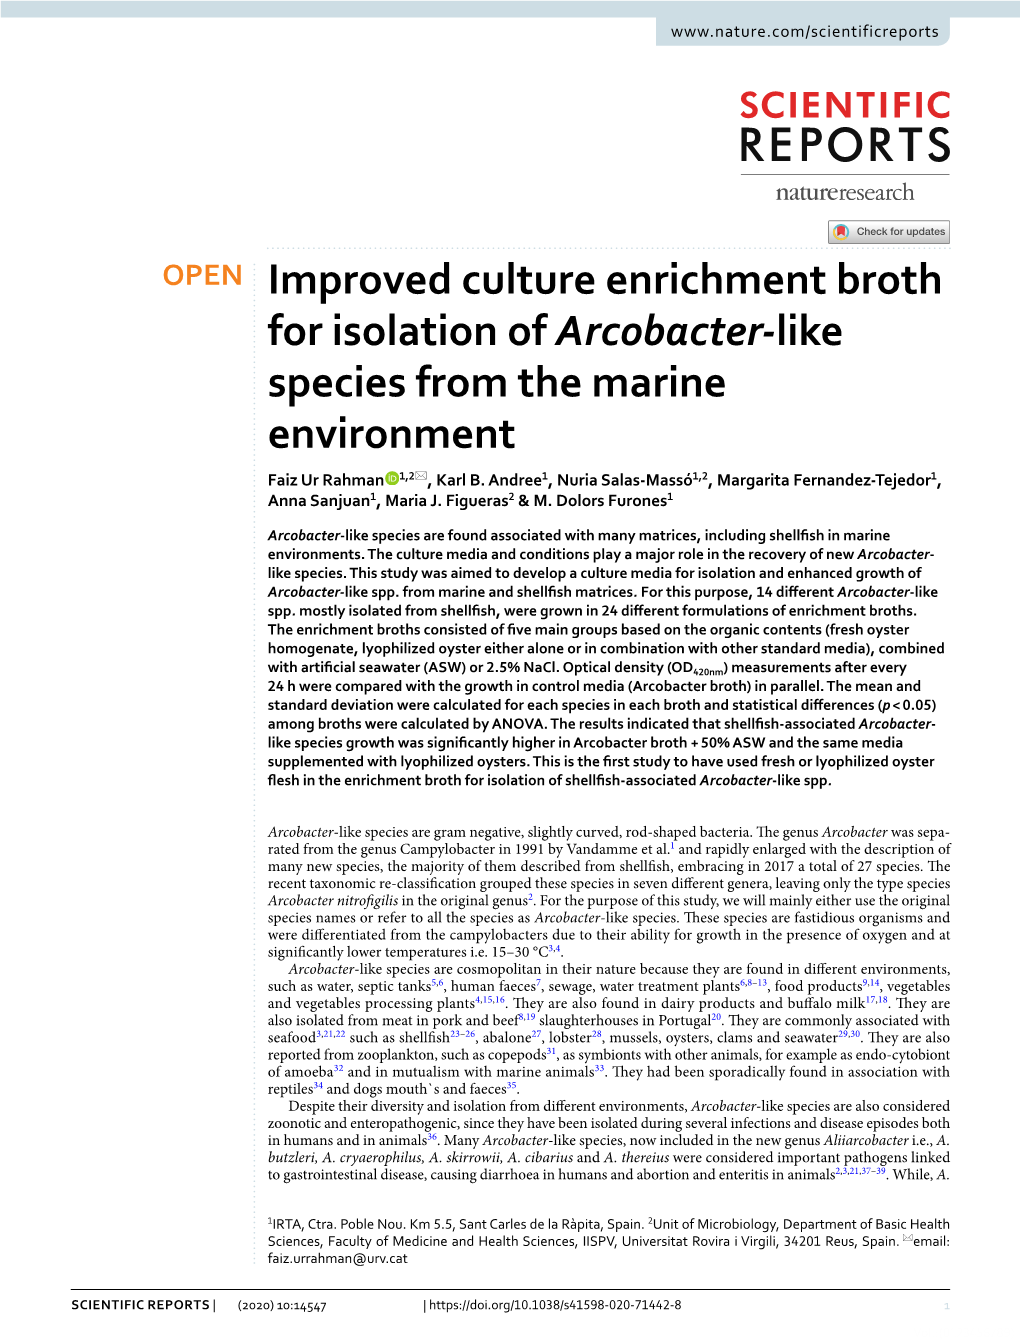 Improved Culture Enrichment Broth for Isolation of Arcobacter-Like Species